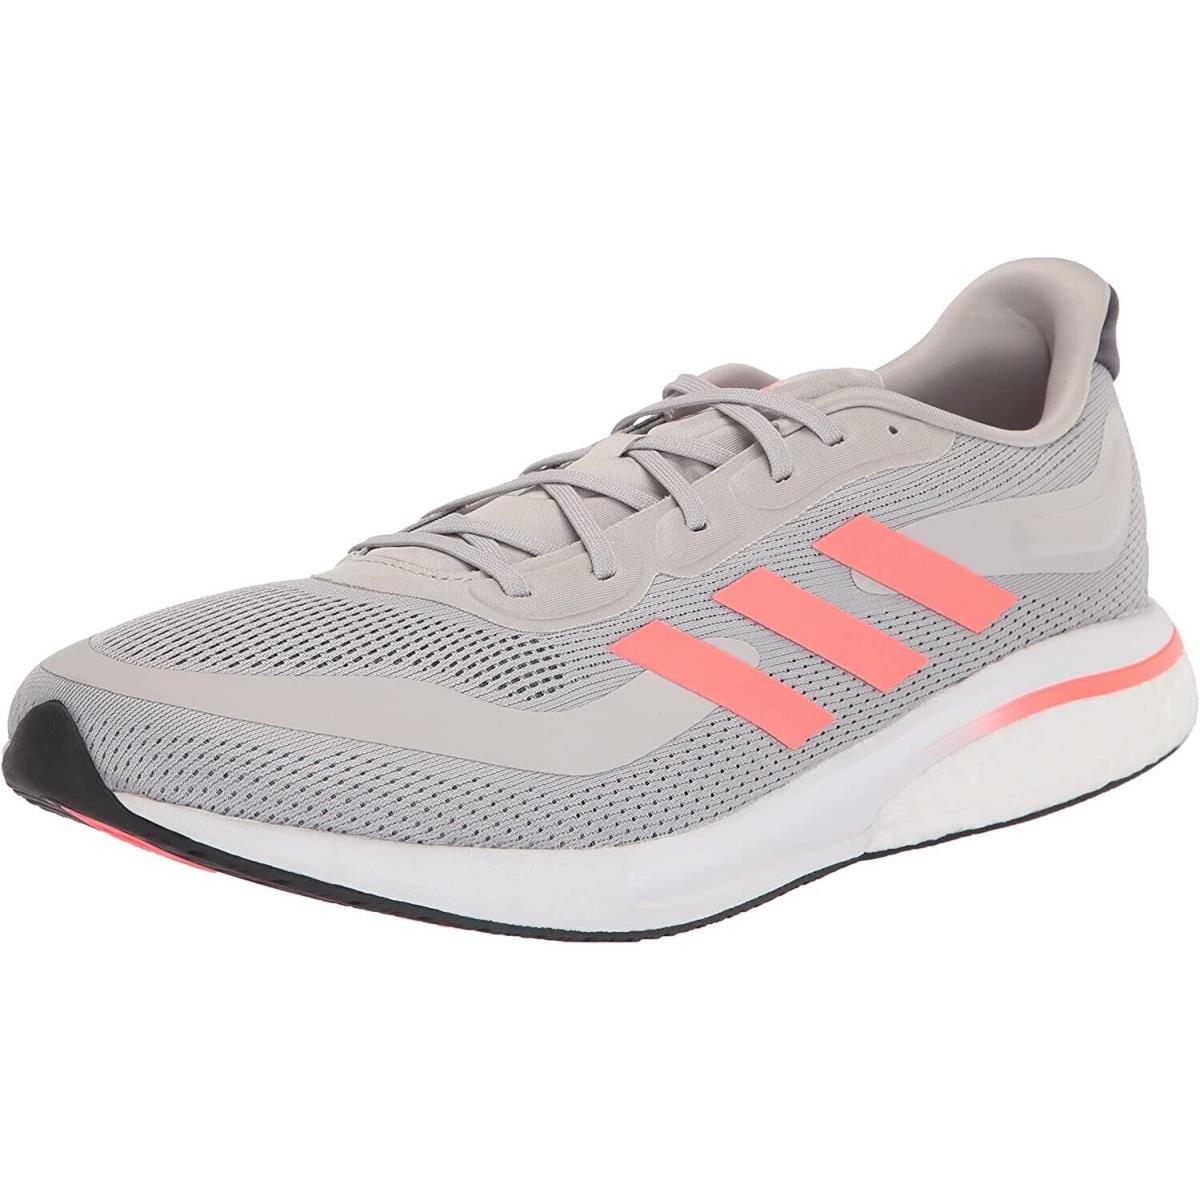 Adidas Men`s Supernova M Running Shoe JX2961 Size 8.5 US IN The Box - Grey Two/Turbo/Grey Two